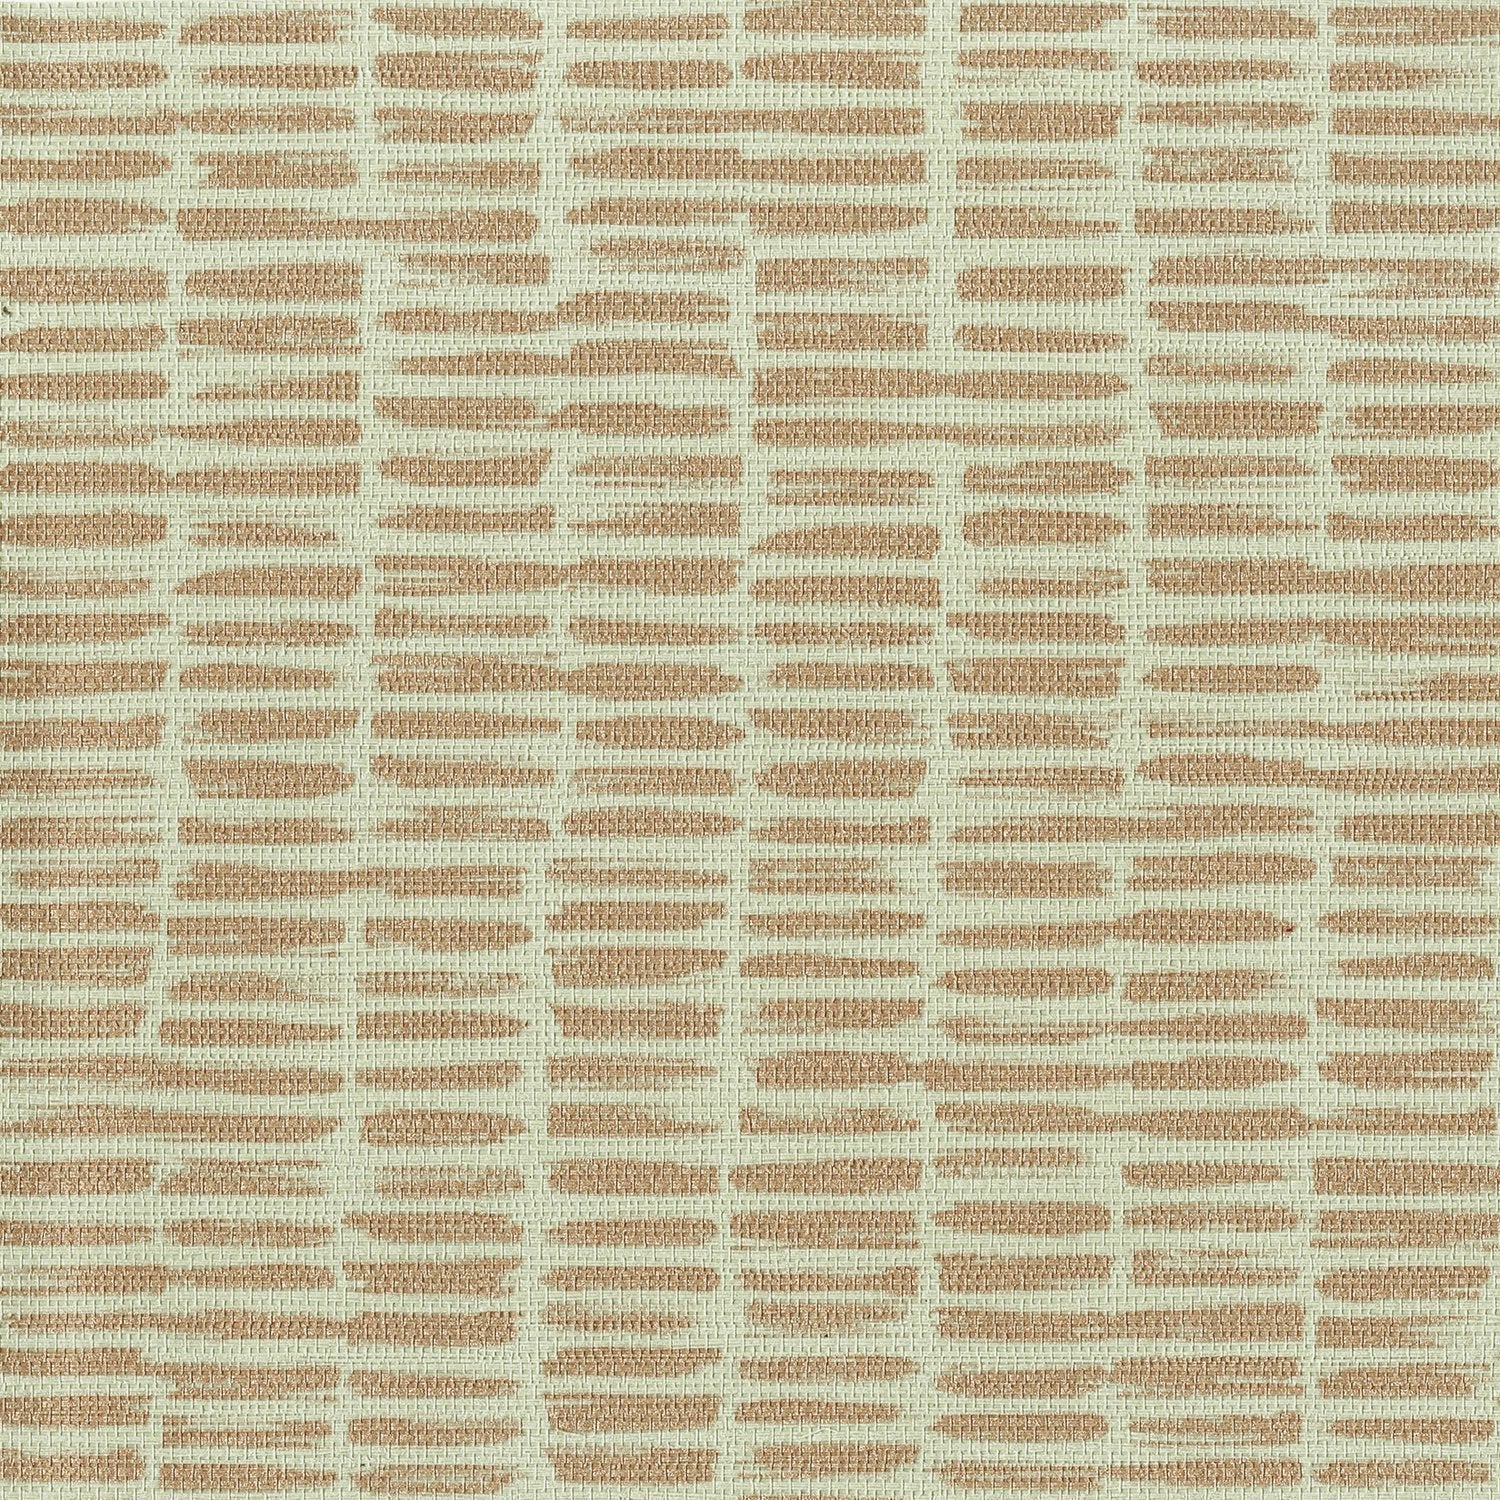 Dash-ing - Y48018 - Wallcovering - Vycon - Kube Contract